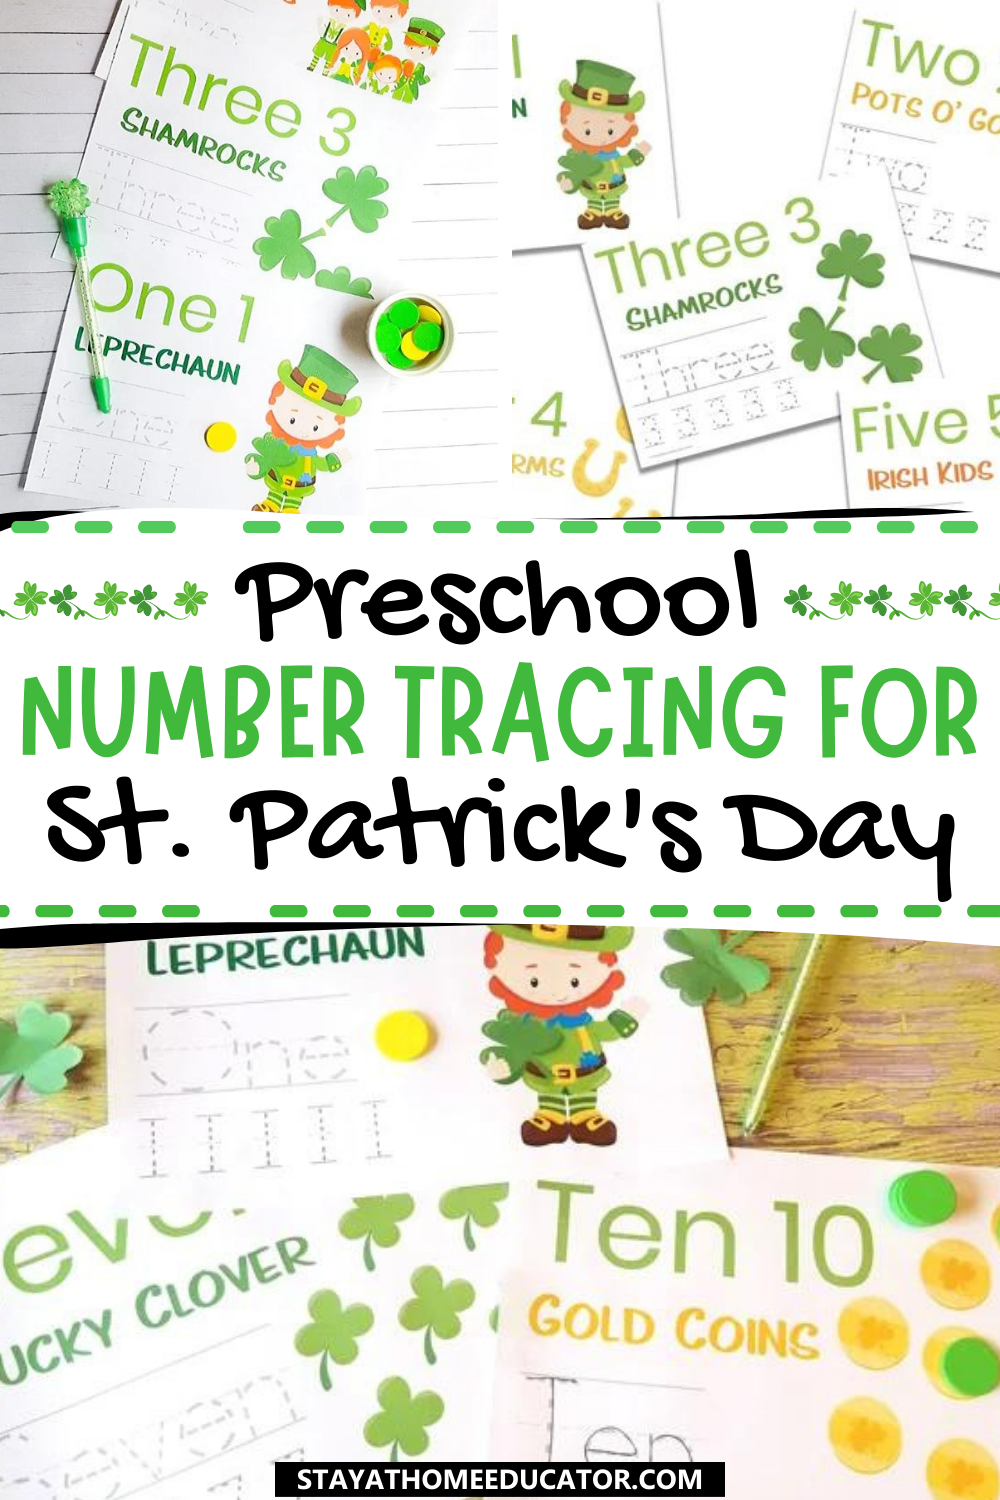 Preschool Number Tracing for St. Patrick's Day | use number worksheets to teach preschoolers number formation, easy tracing activities | worksheets feature written number and numeral for tracing practice